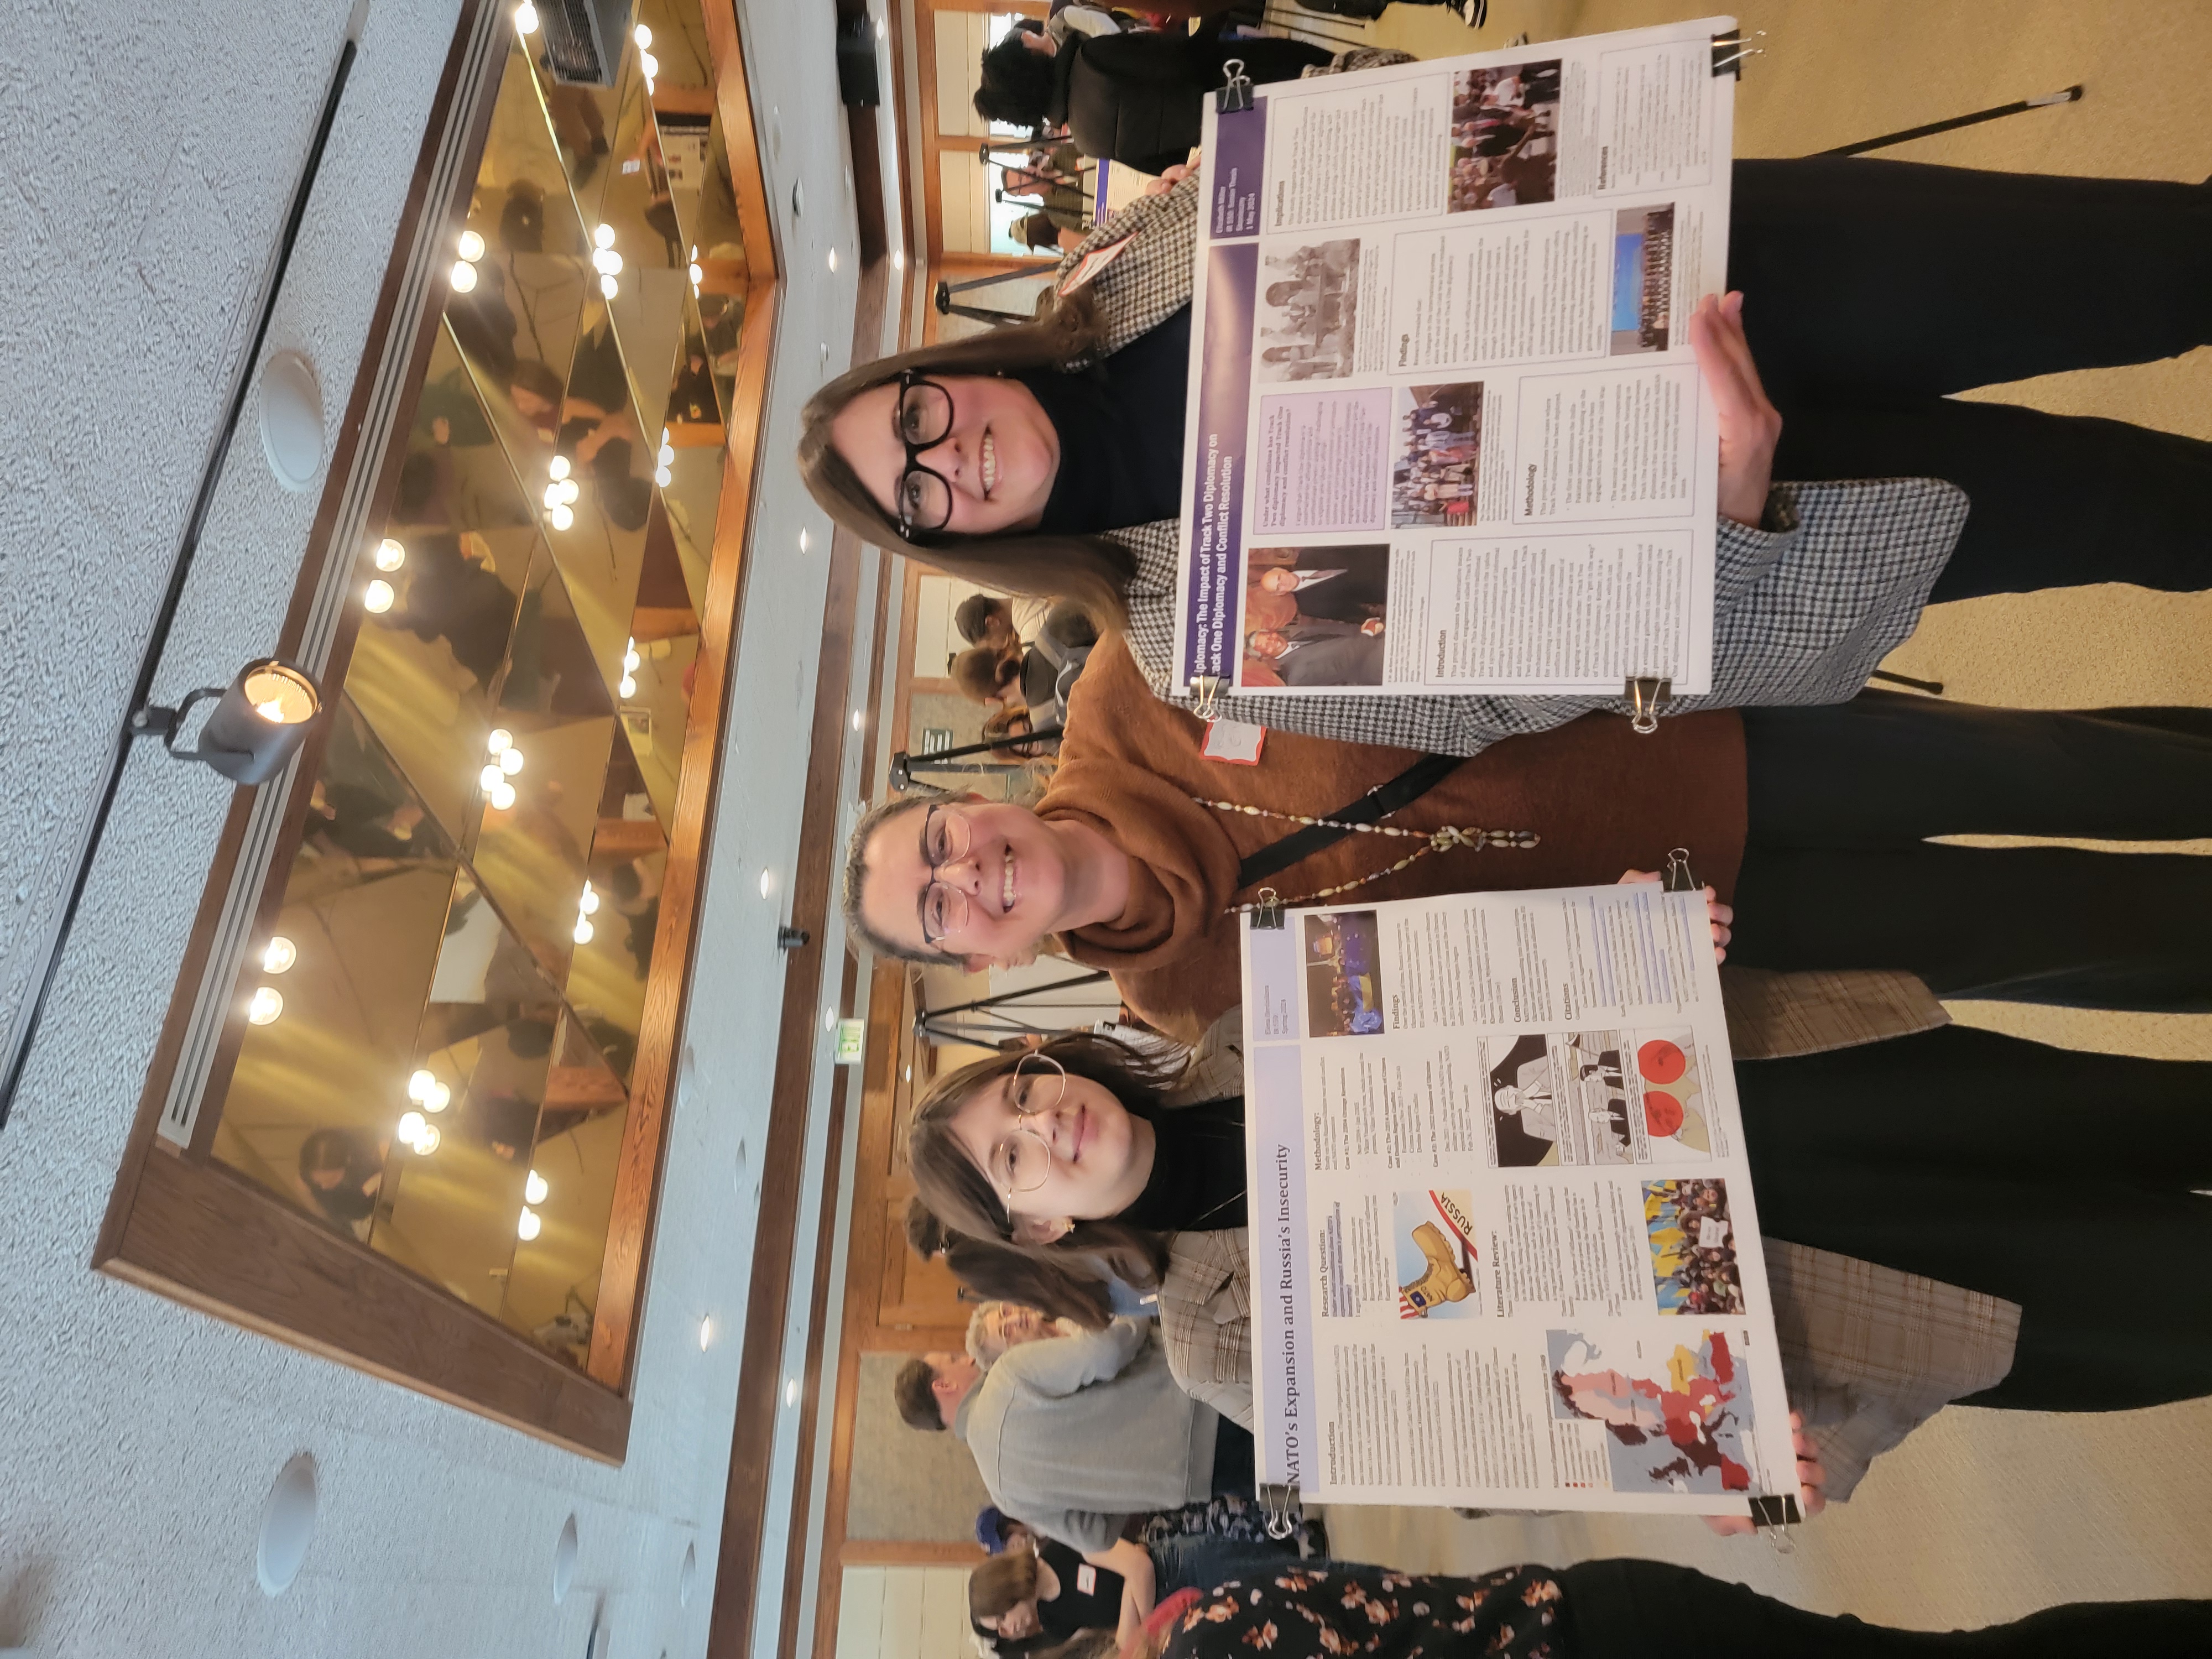 Two students in matching glasses, blazers, turtlenecks, and slacks stand and smile for the camera, holding their presentation posters. Professor Burcu Ellis stands between and behind them, smiling.